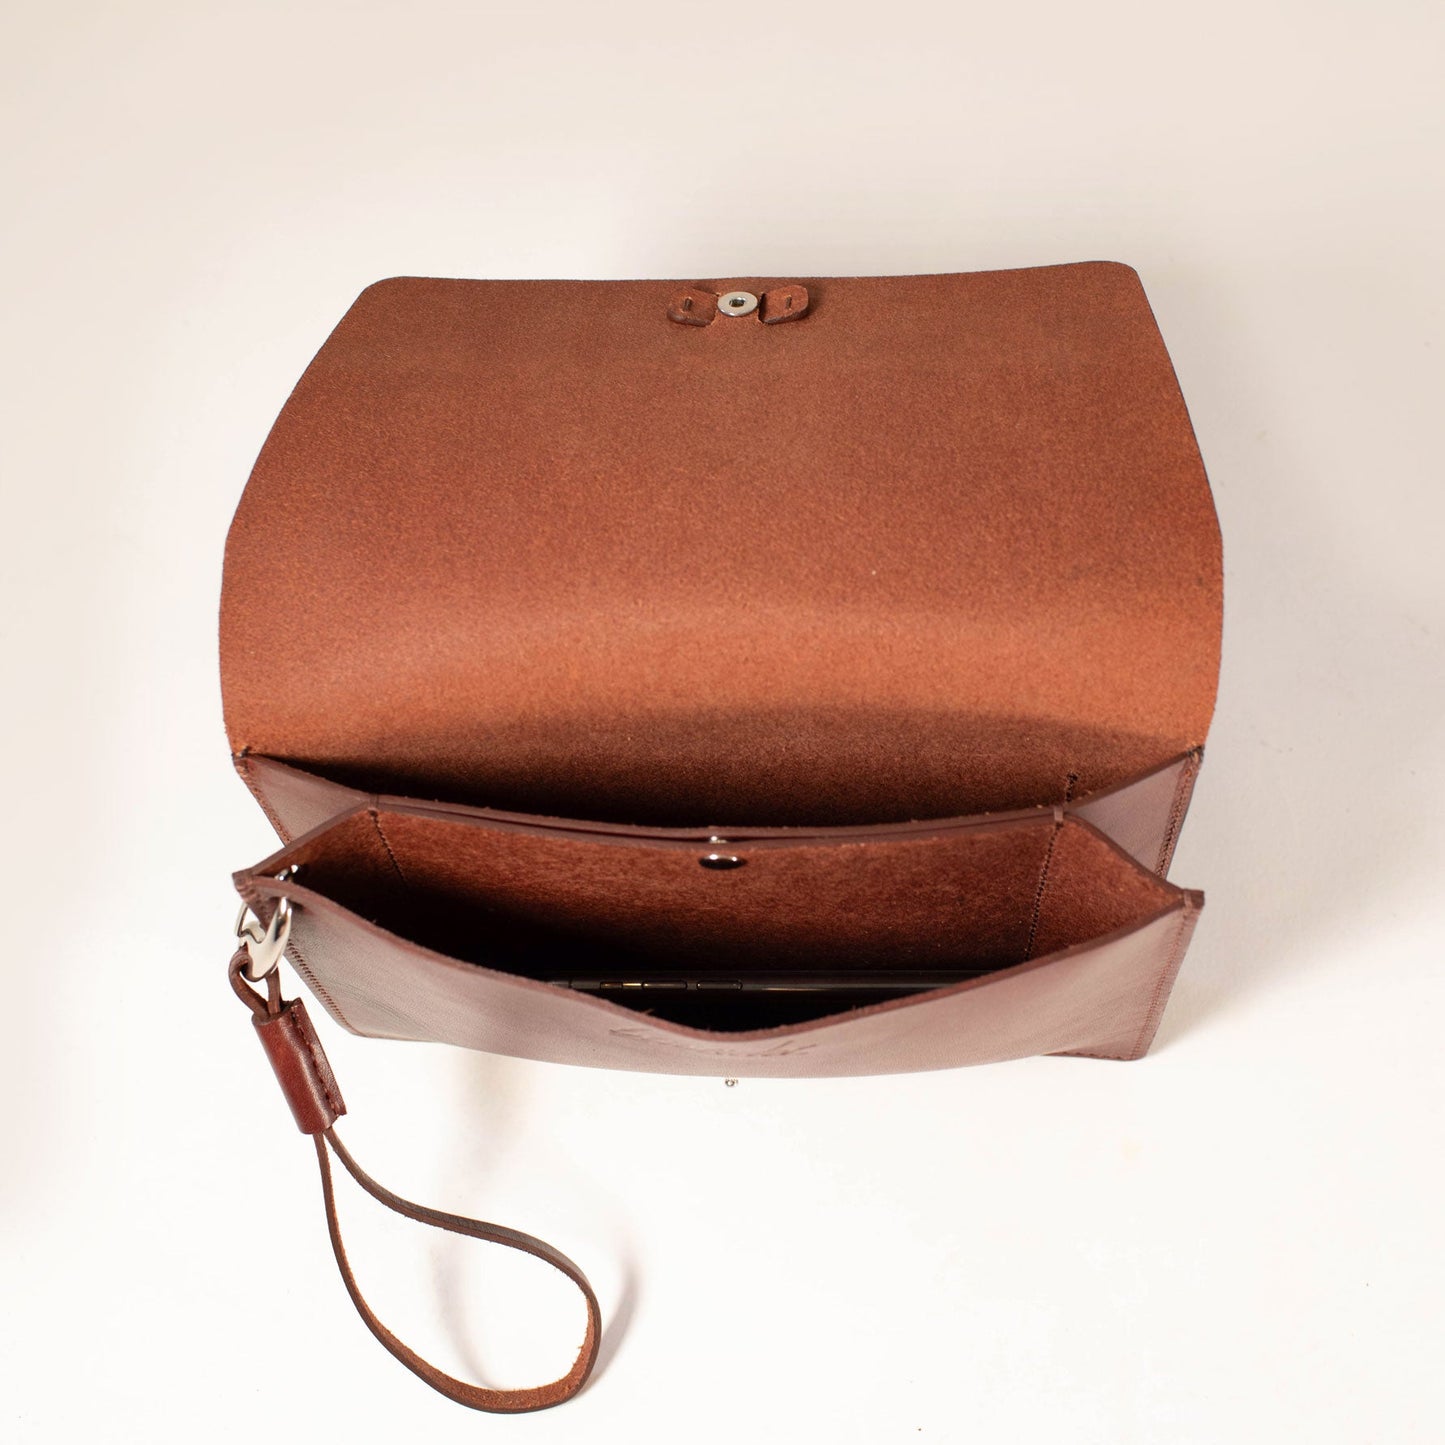 The Ingrid - limited edition leather